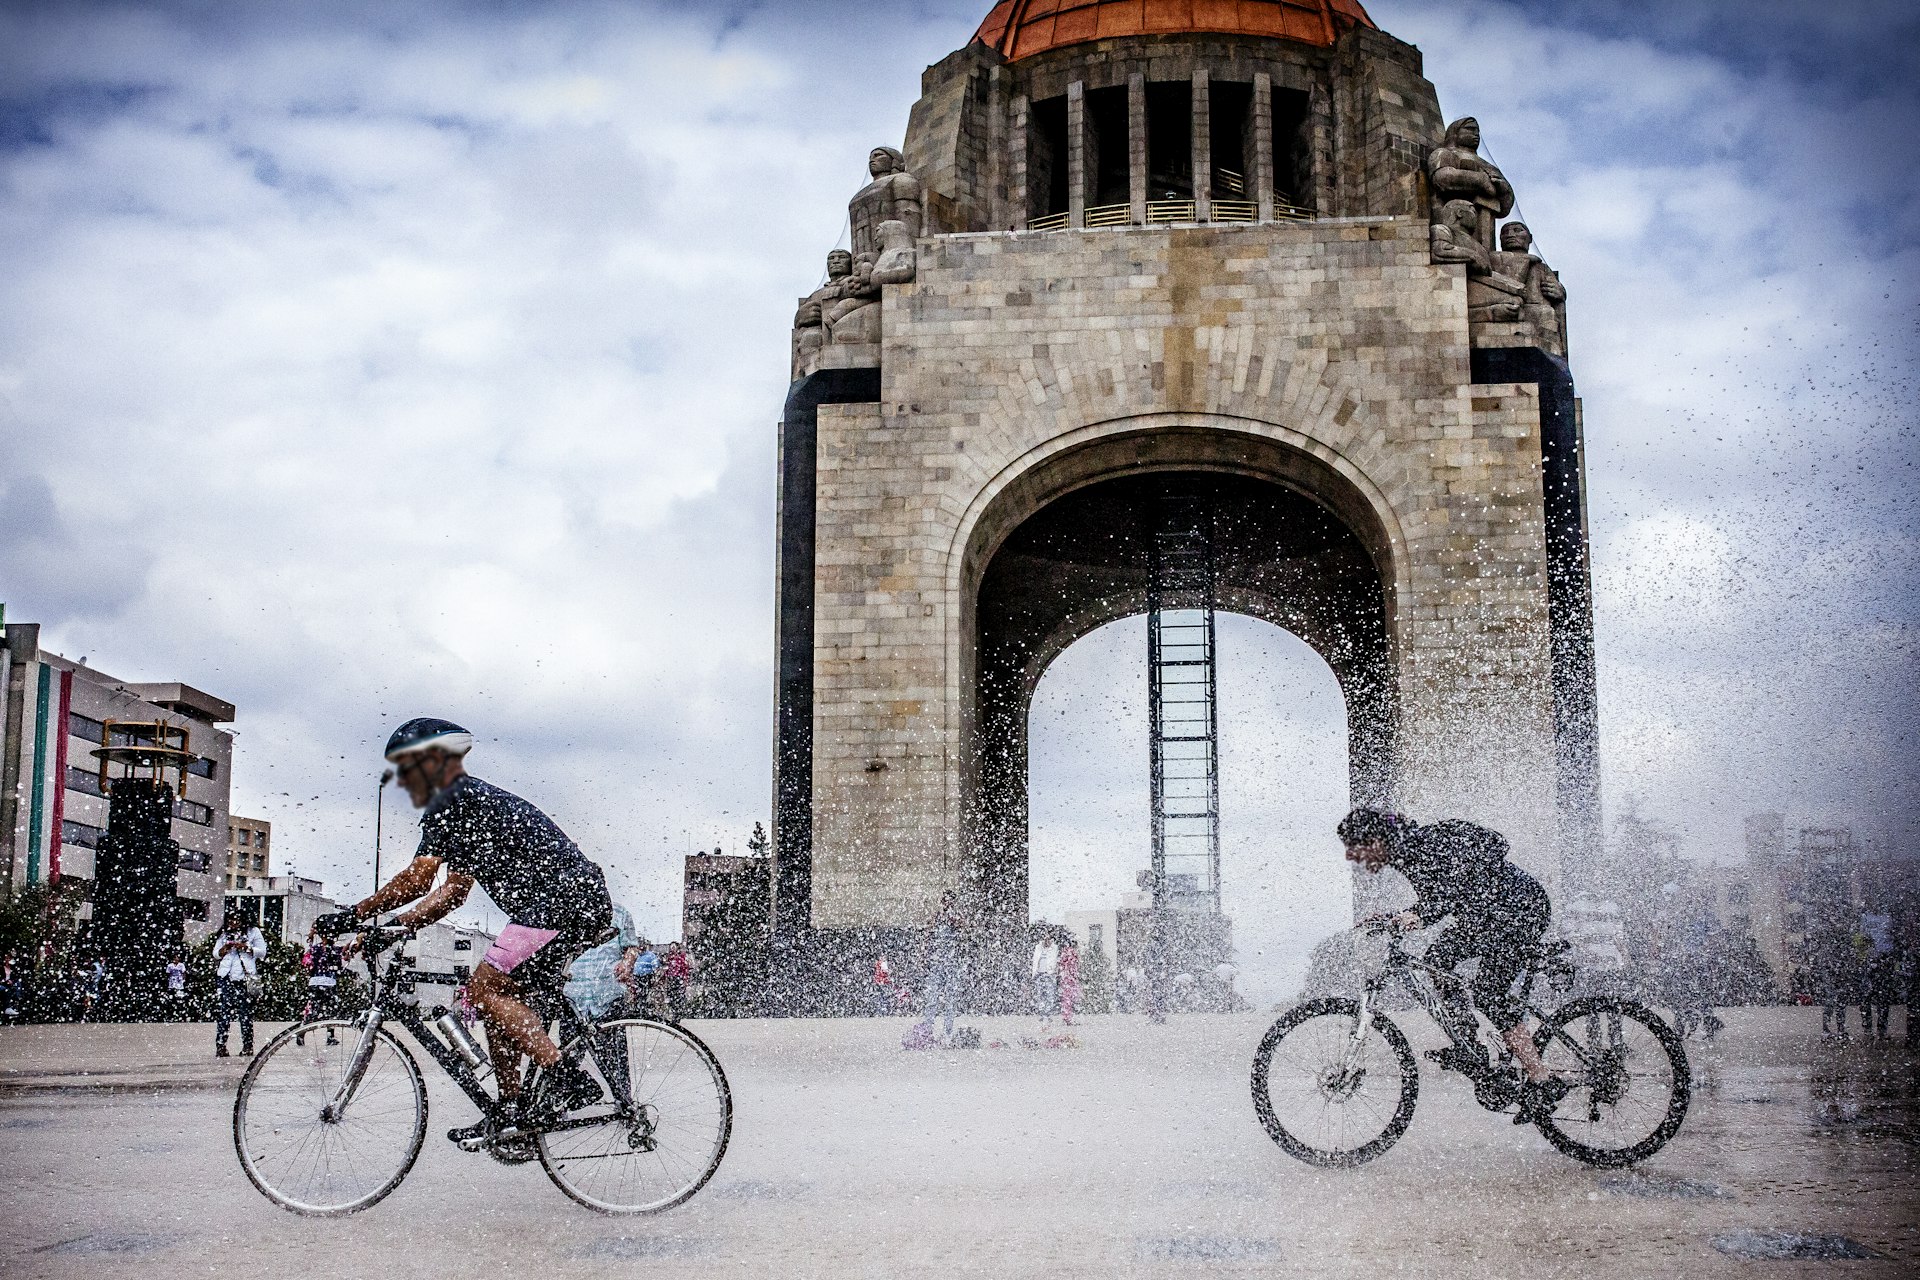 Two cyclists splash through puddles in front of a large monument